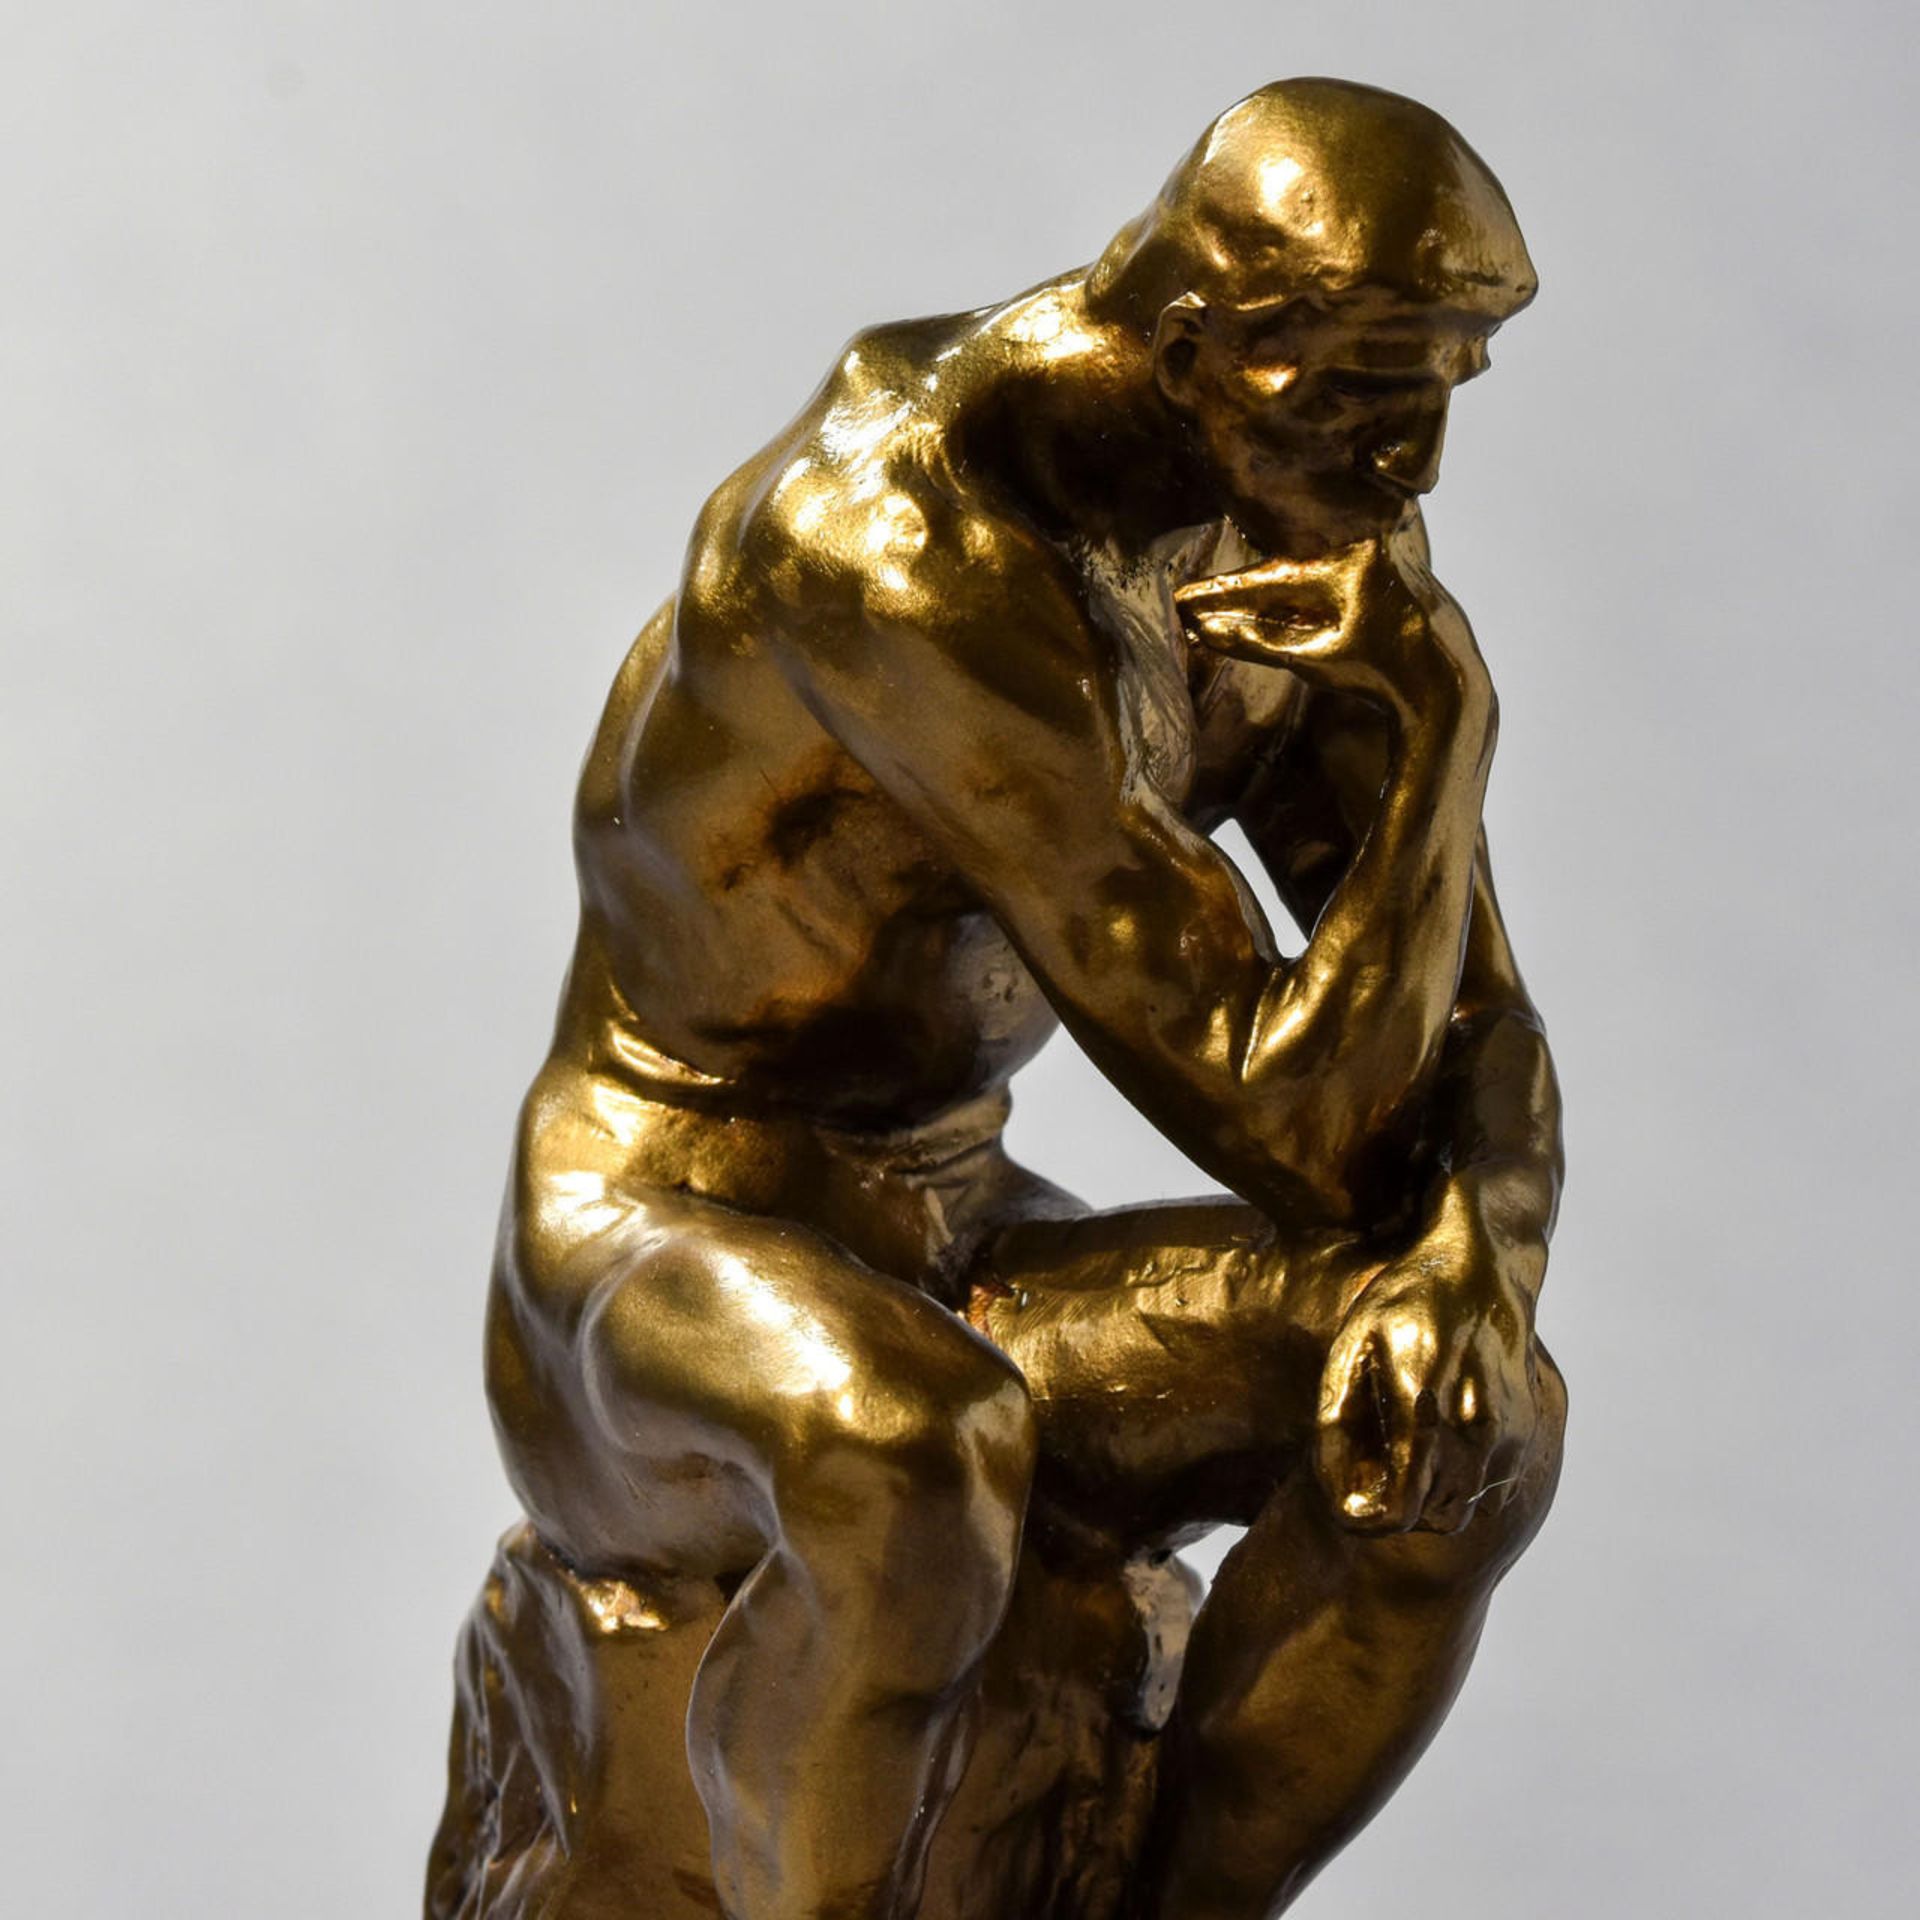 Auguste Rodin "The Thinker" Sculpture - Image 2 of 4